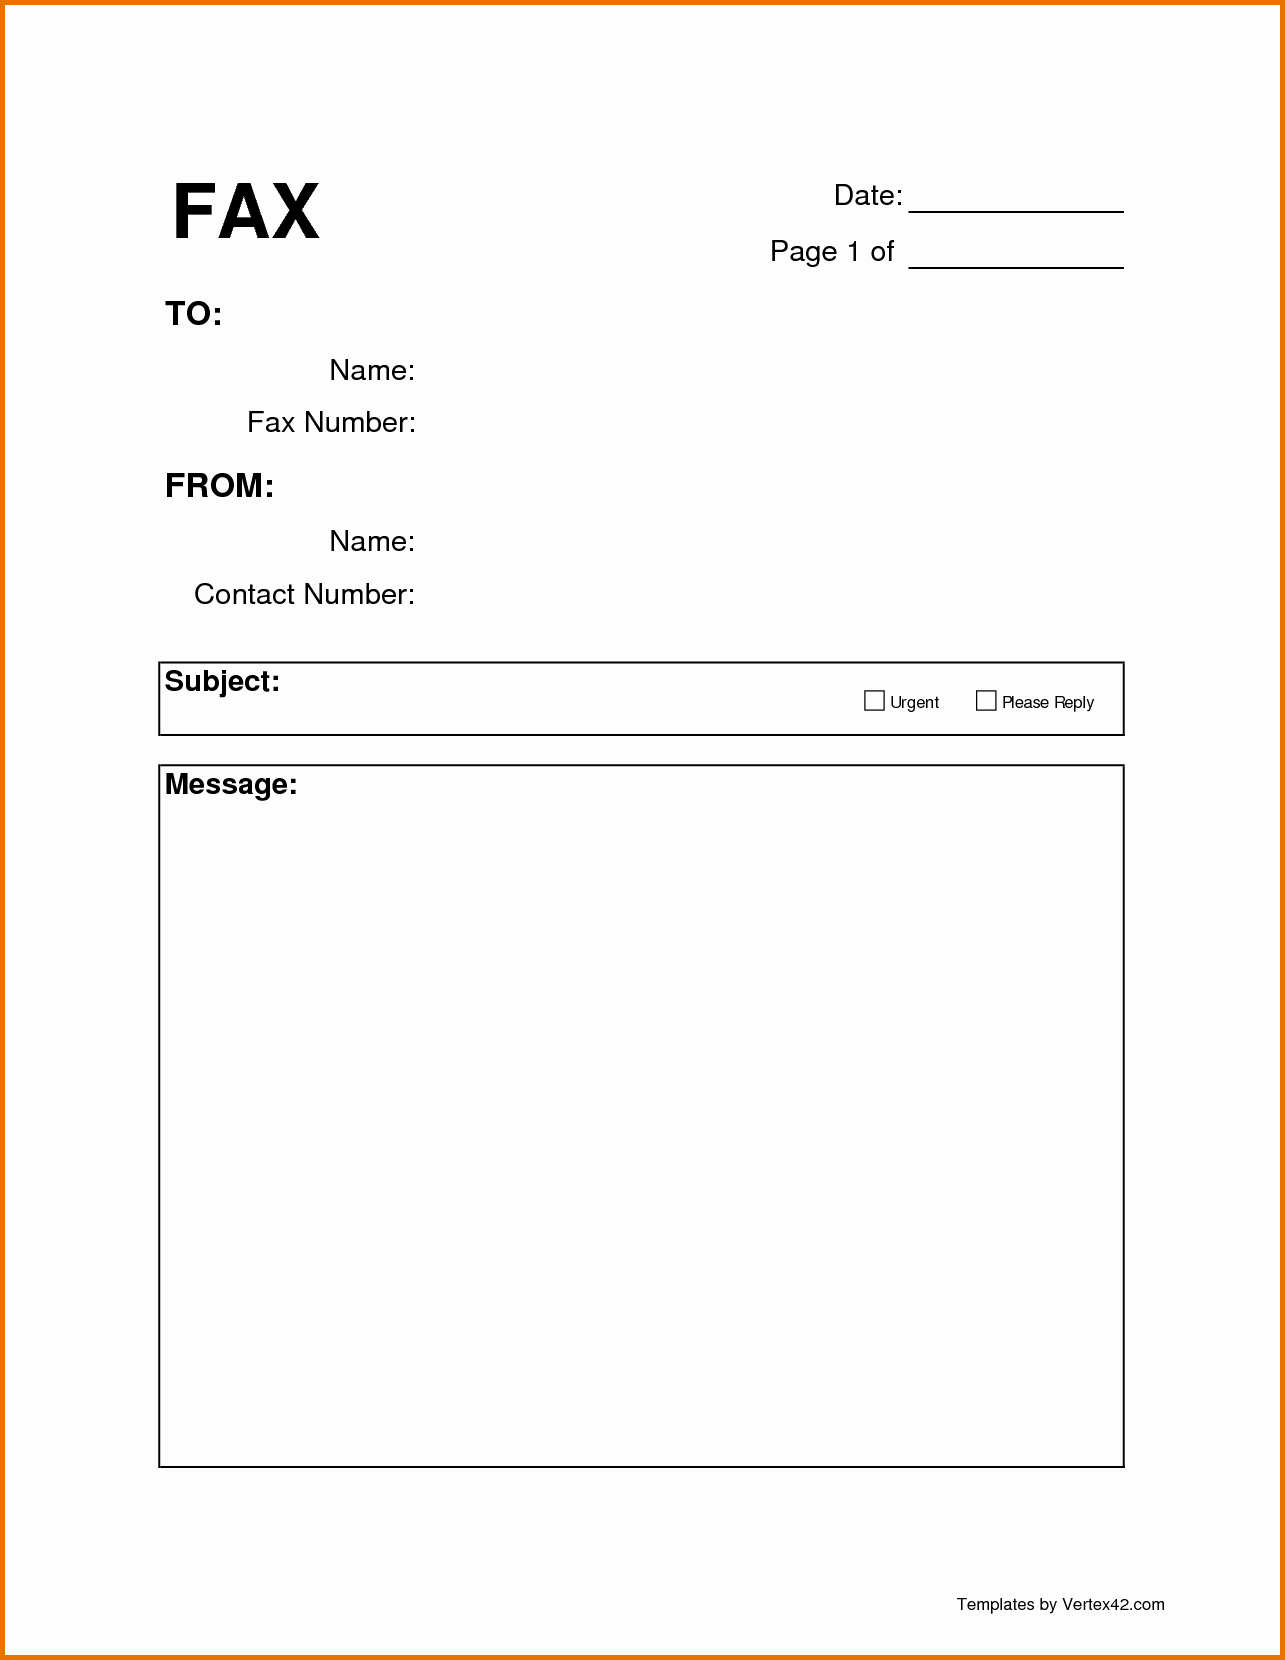 Fax Cover Sheet Pdf format Best Of 4 Printable Fax Cover Sheetsreference Letters Words